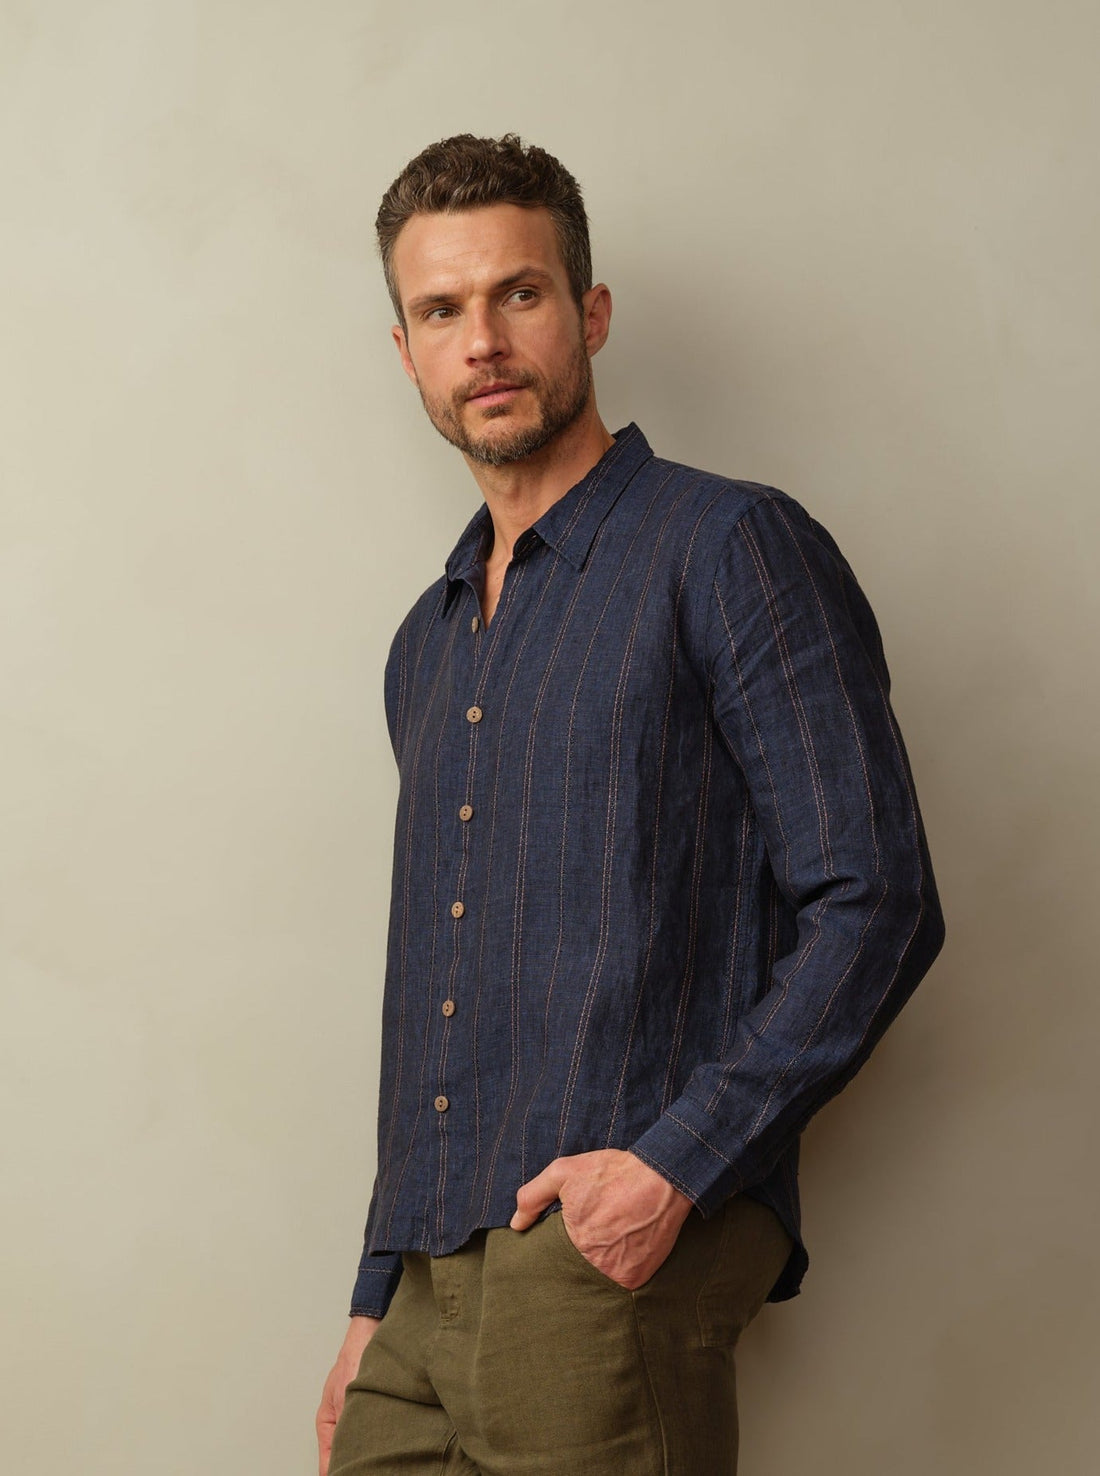 Men's Accord Embroidered Linen Shirt